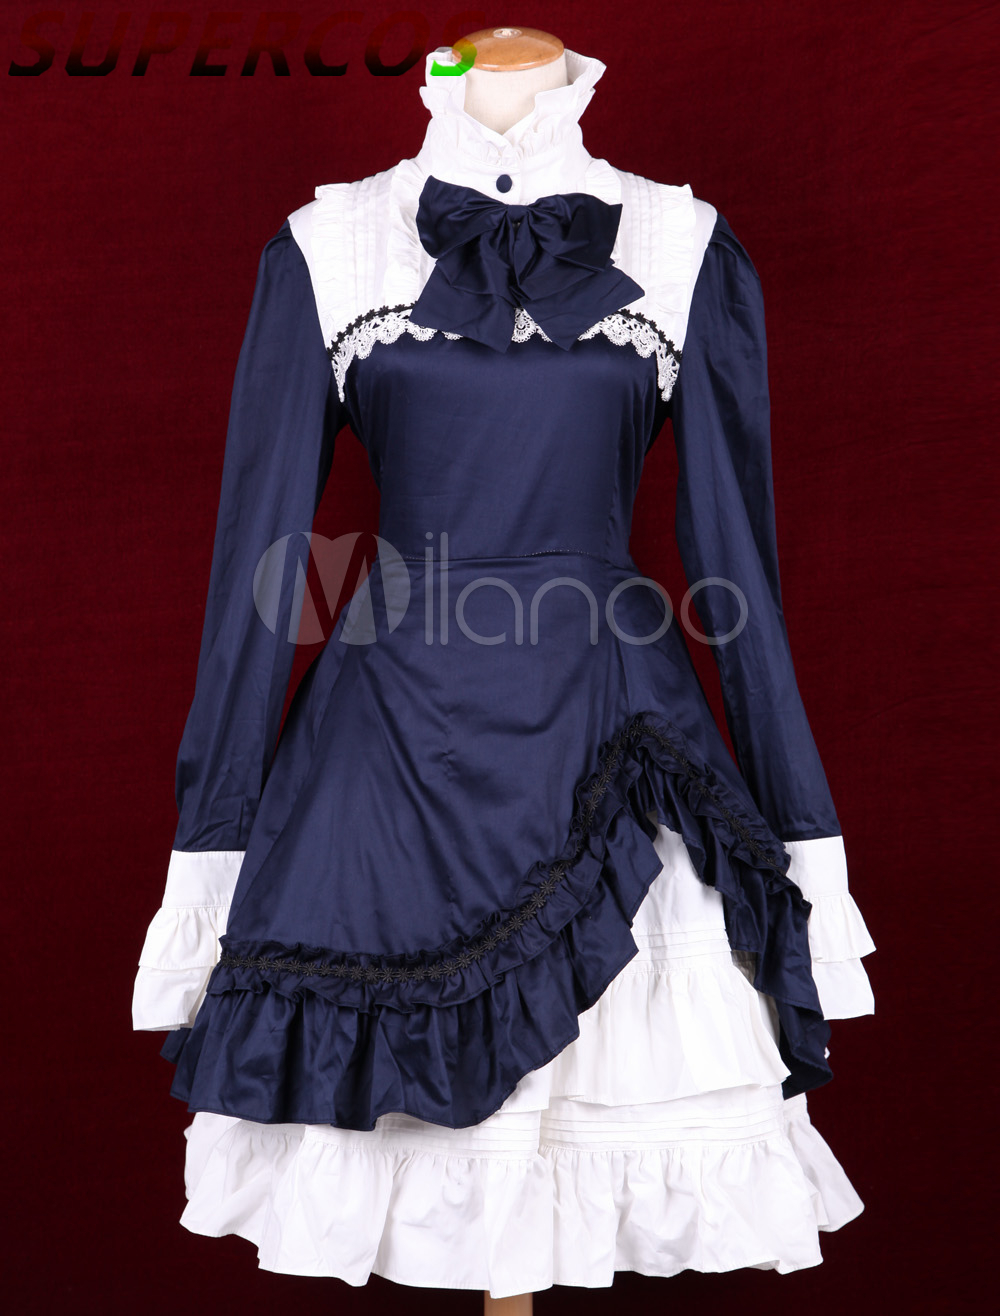 Free shipping! New Arrivals! High quality! White Navy Blue Cotton Stand Collar Long Sleeves Classic Lolita Dress